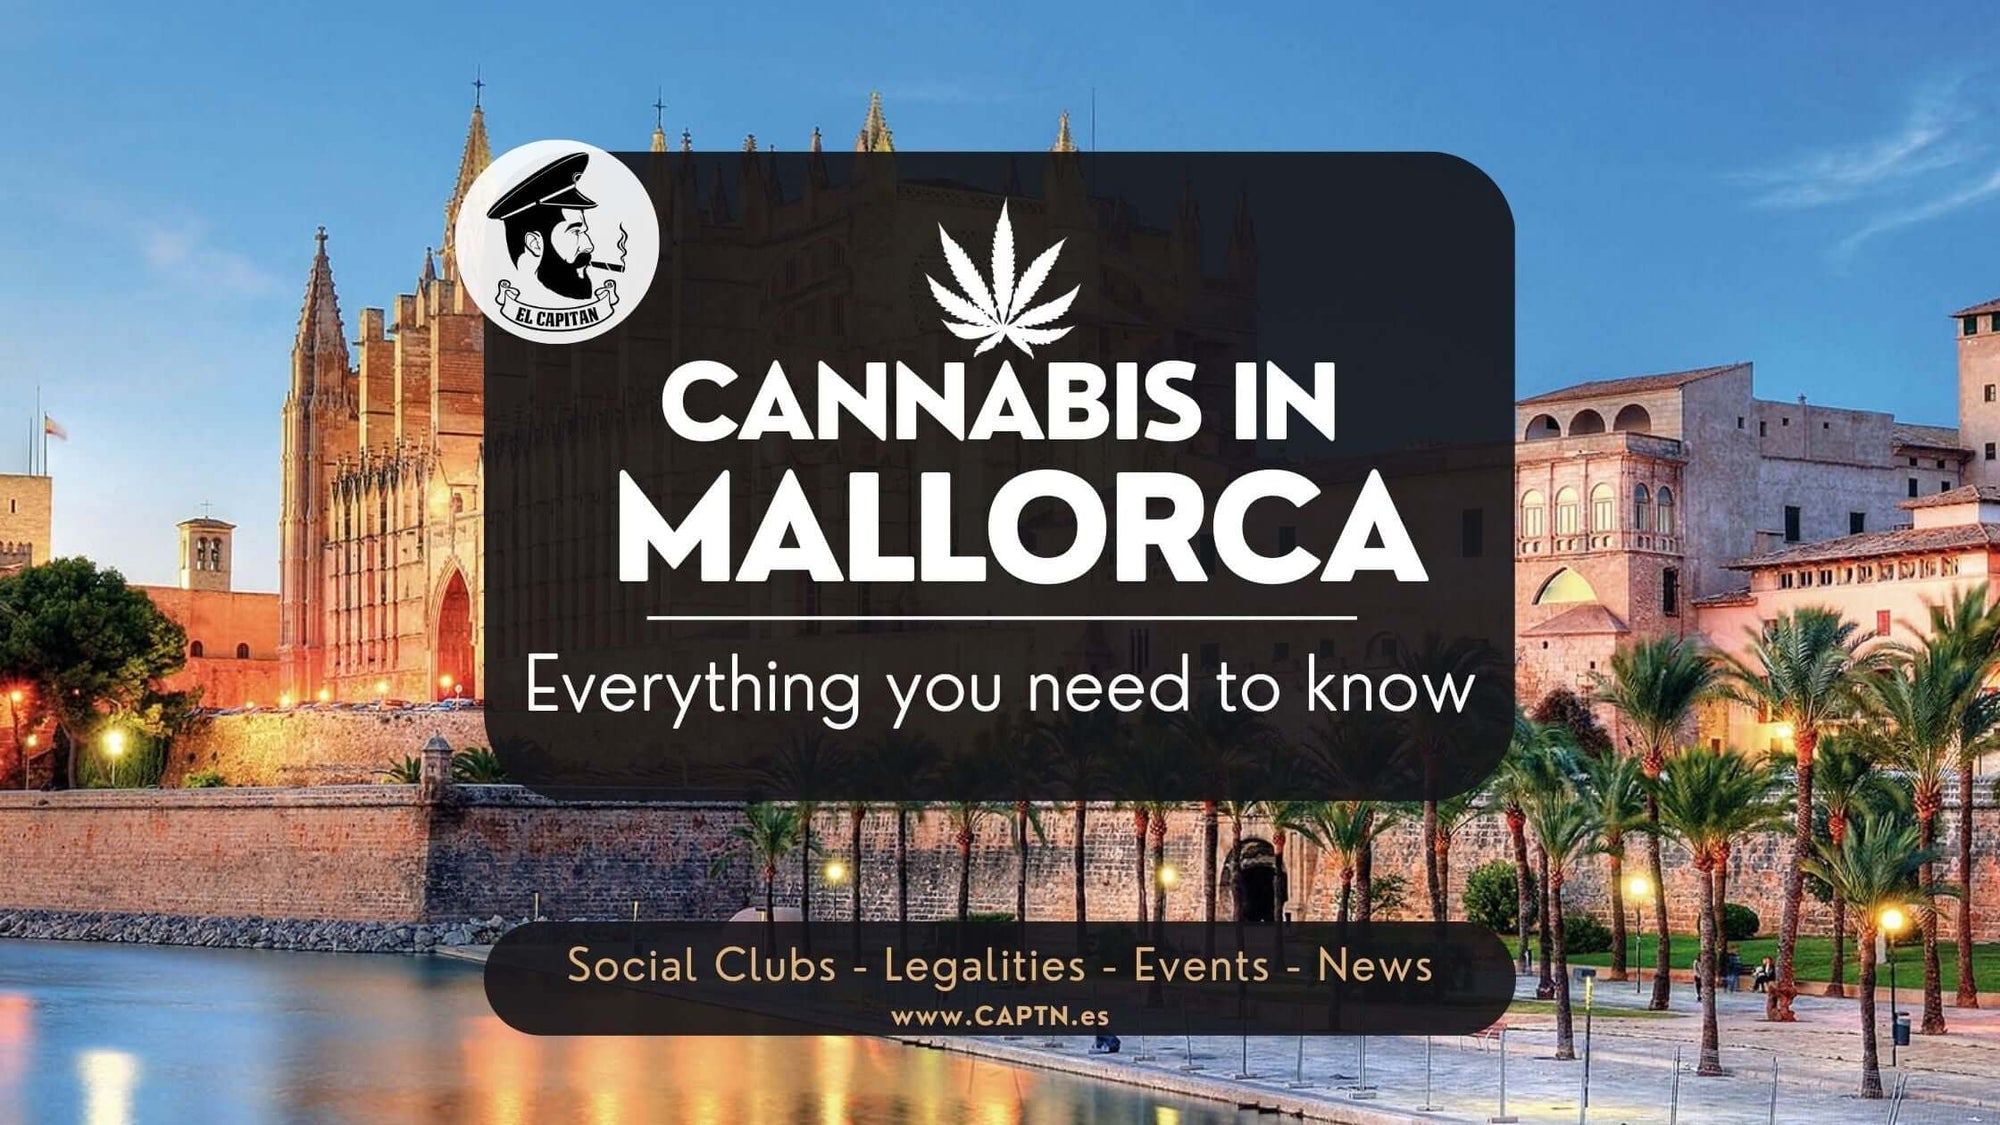 Picture of el capitan finding weed and social clubs in palma de mallorca